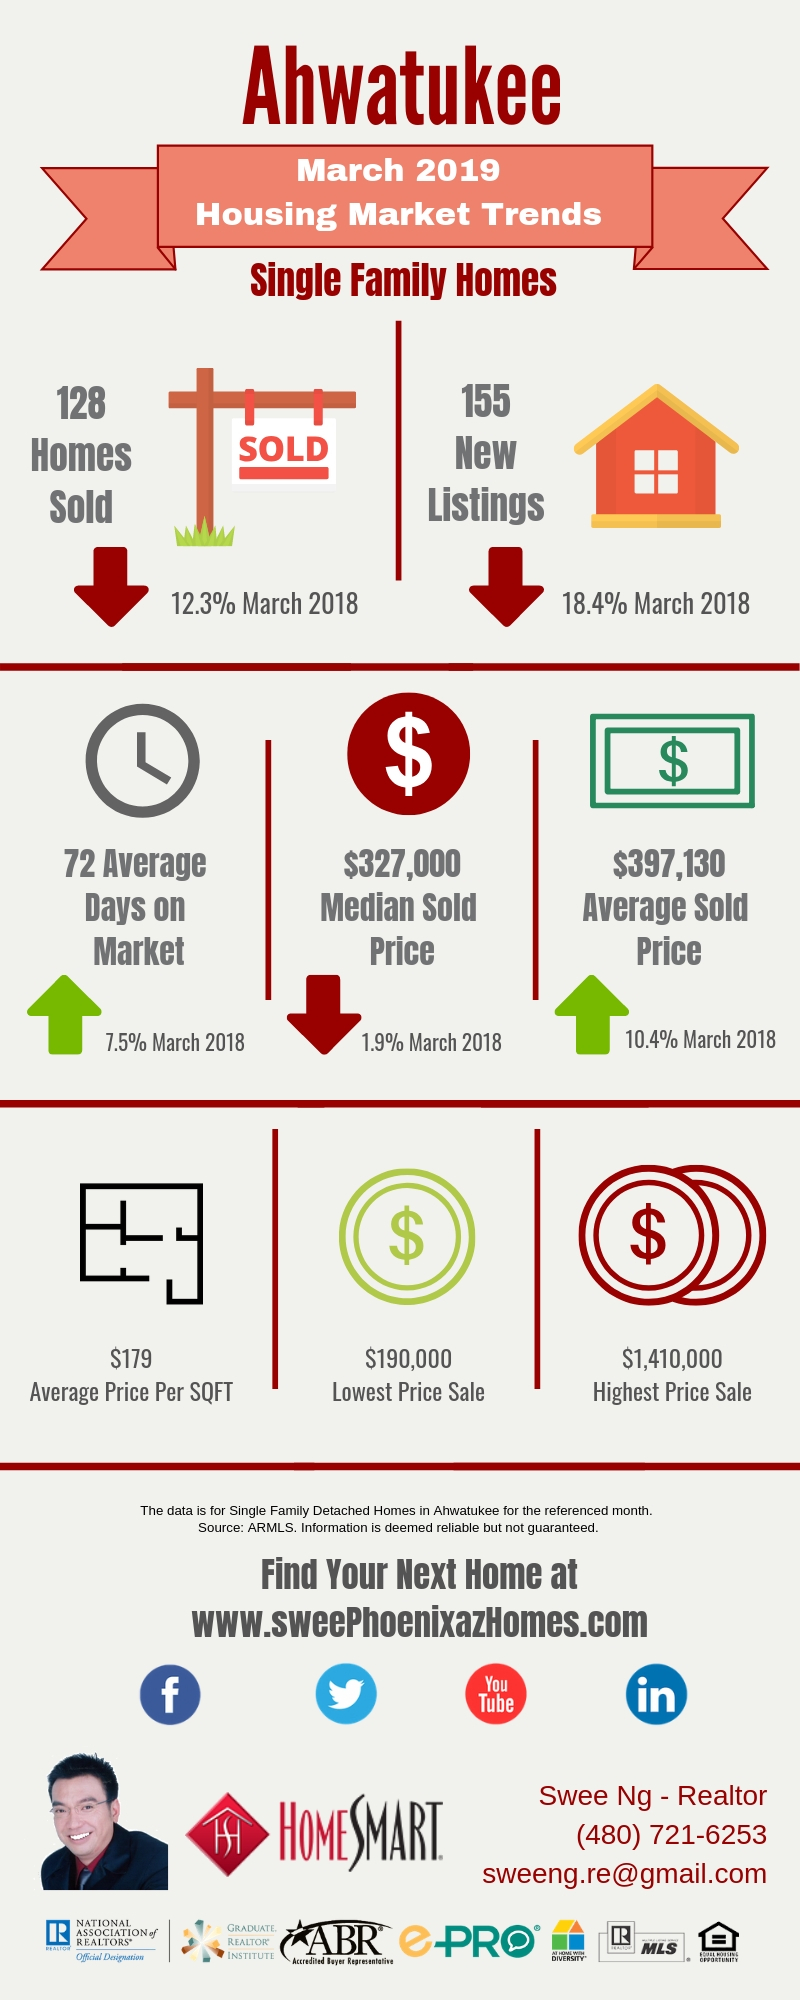 Ahwatukee Housing Market Trends Report March 2019, House Value, Real Estate and Statistic by Swee Ng